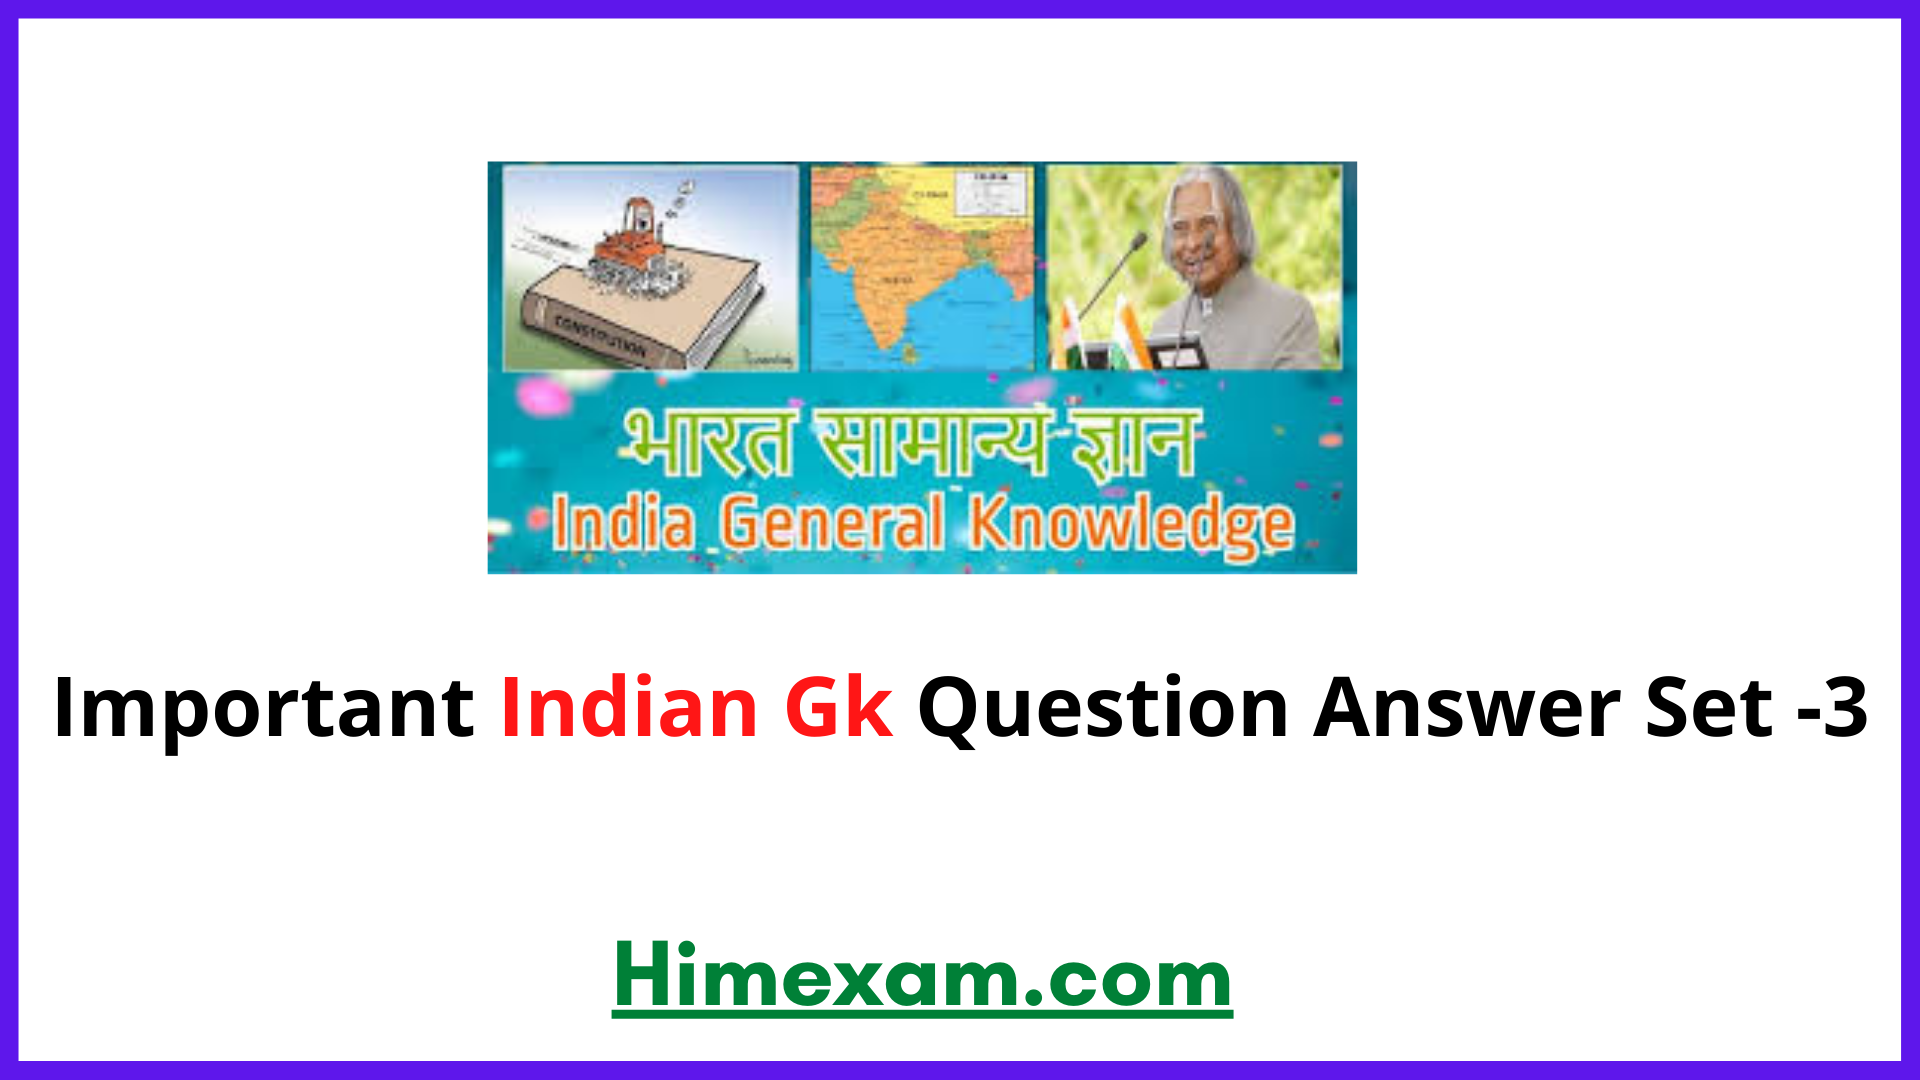 Important Indian Gk Question Answer Set -3